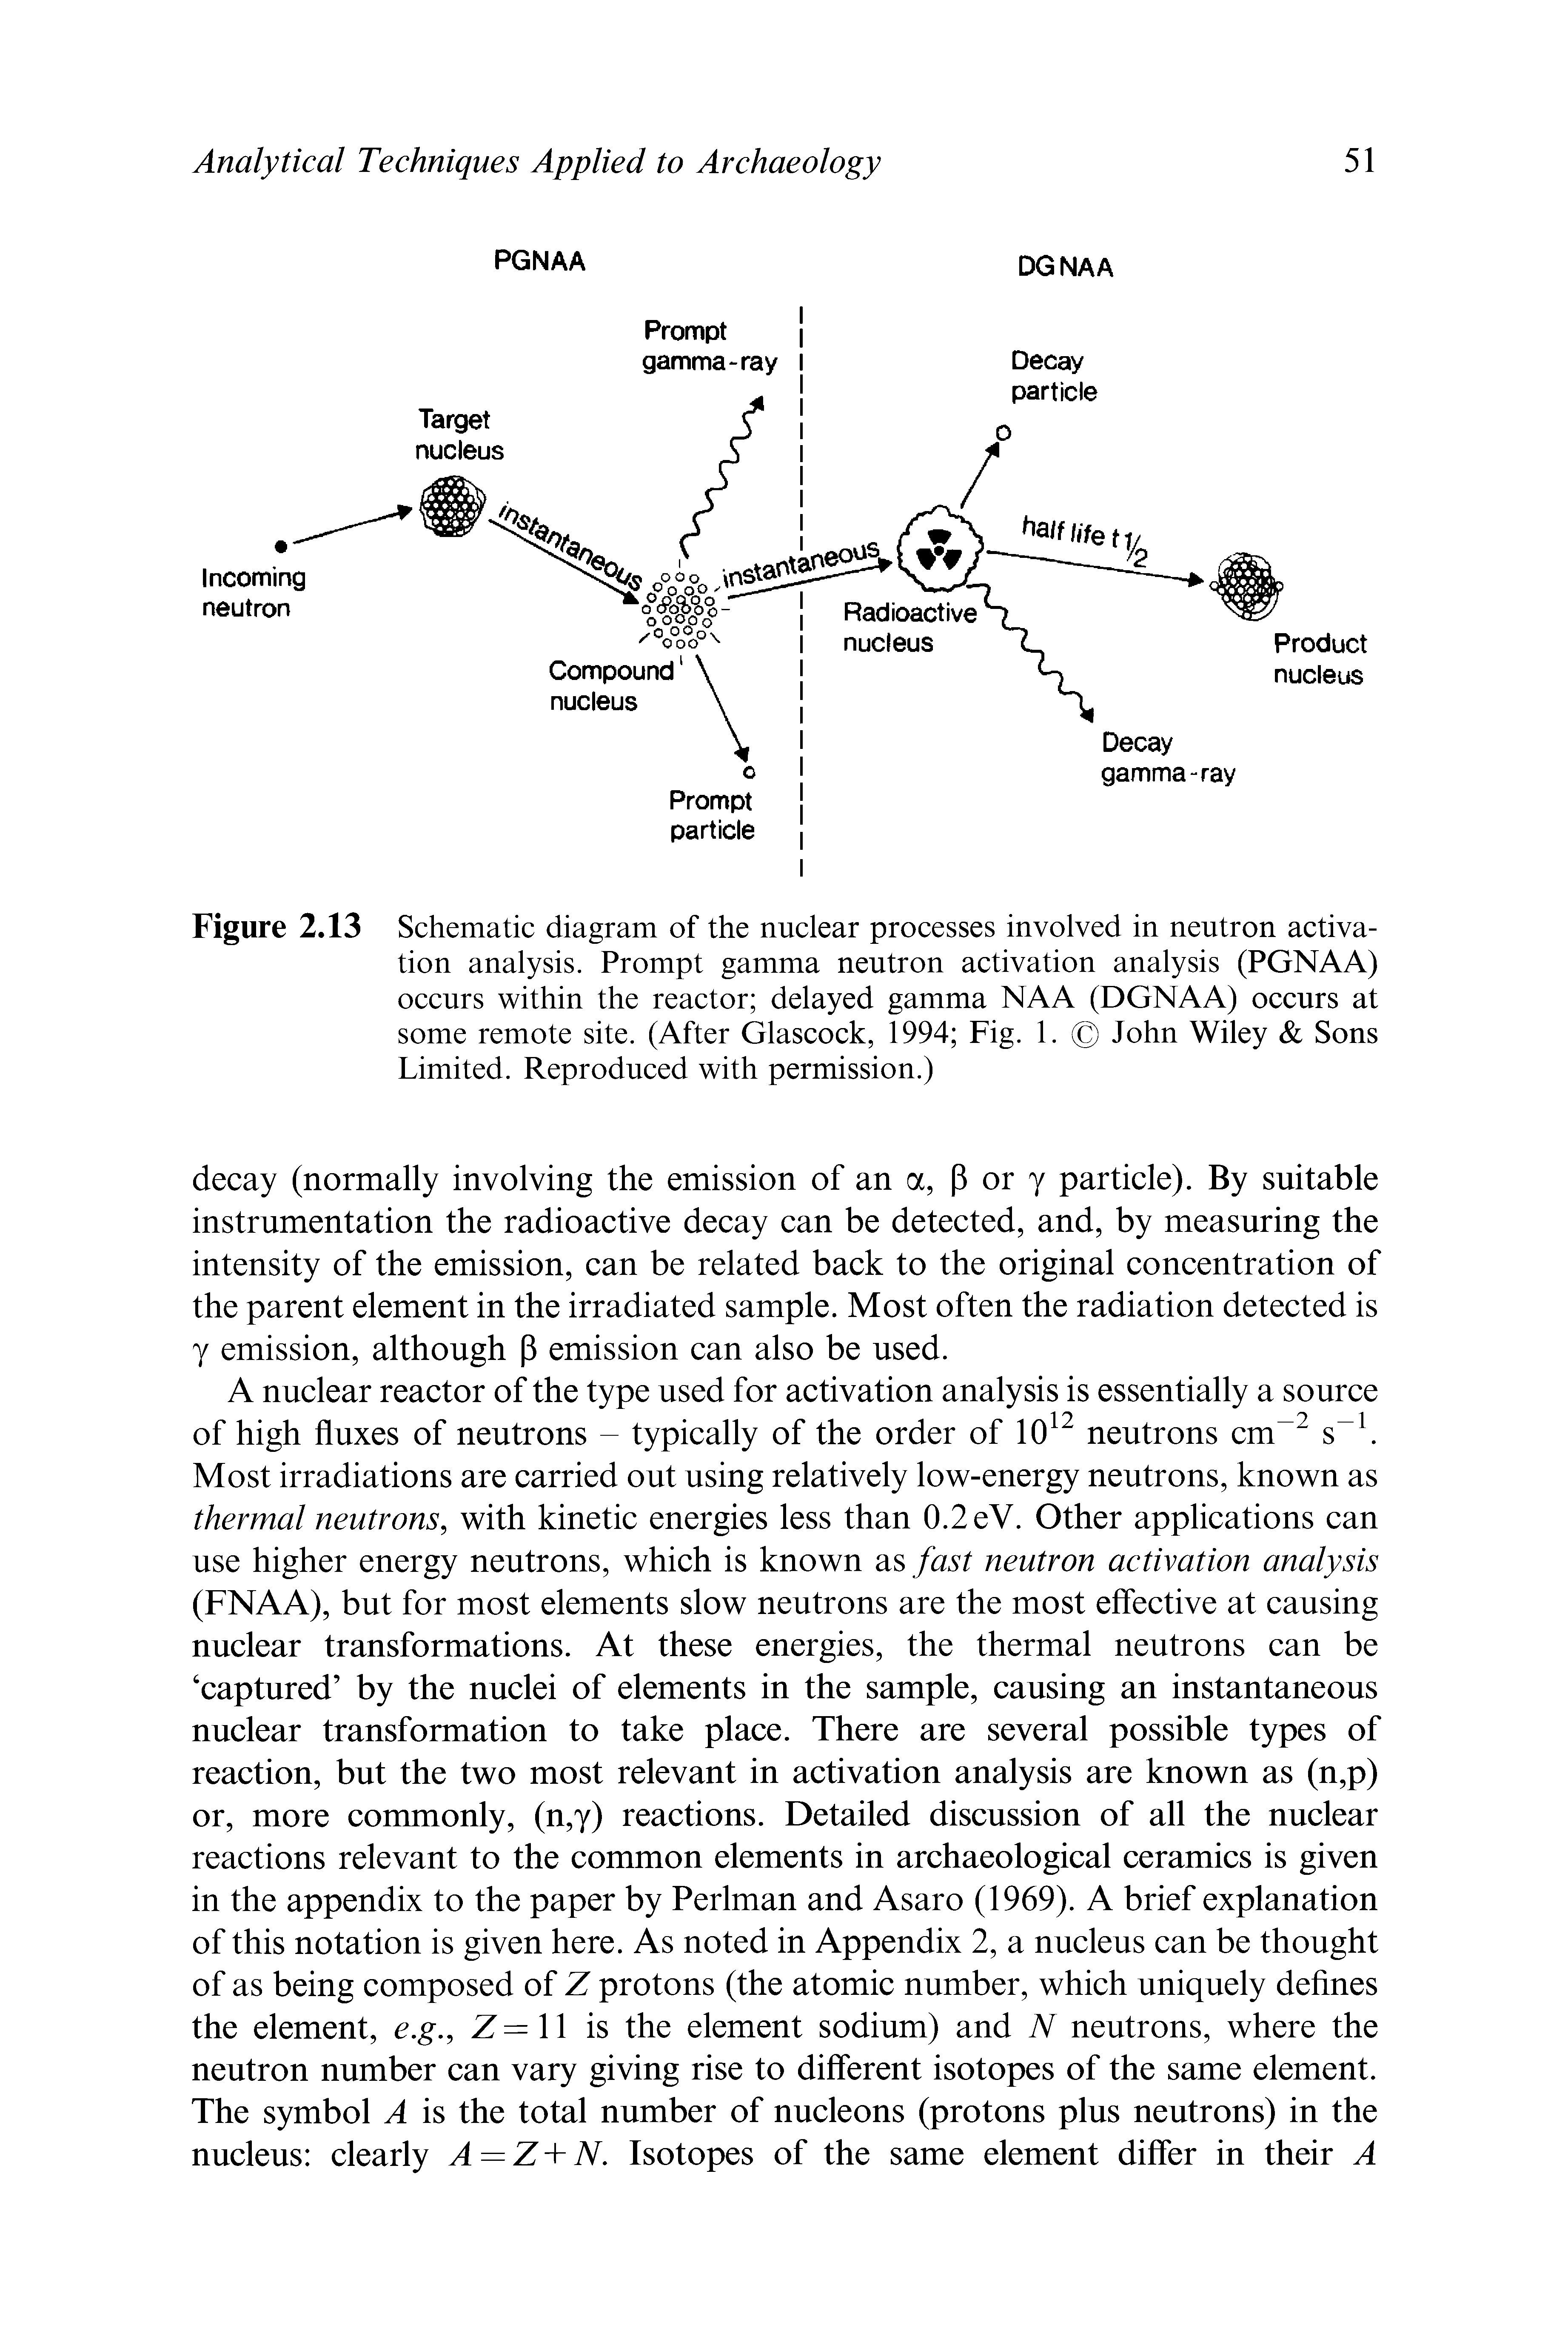 Figure 2.13 Schematic diagram of the nuclear processes involved in neutron activation analysis. Prompt gamma neutron activation analysis (PGNAA) occurs within the reactor delayed gamma NAA (DGNAA) occurs at some remote site. (After Glascock, 1994 Fig. 1. John Wiley Sons Limited. Reproduced with permission.)...